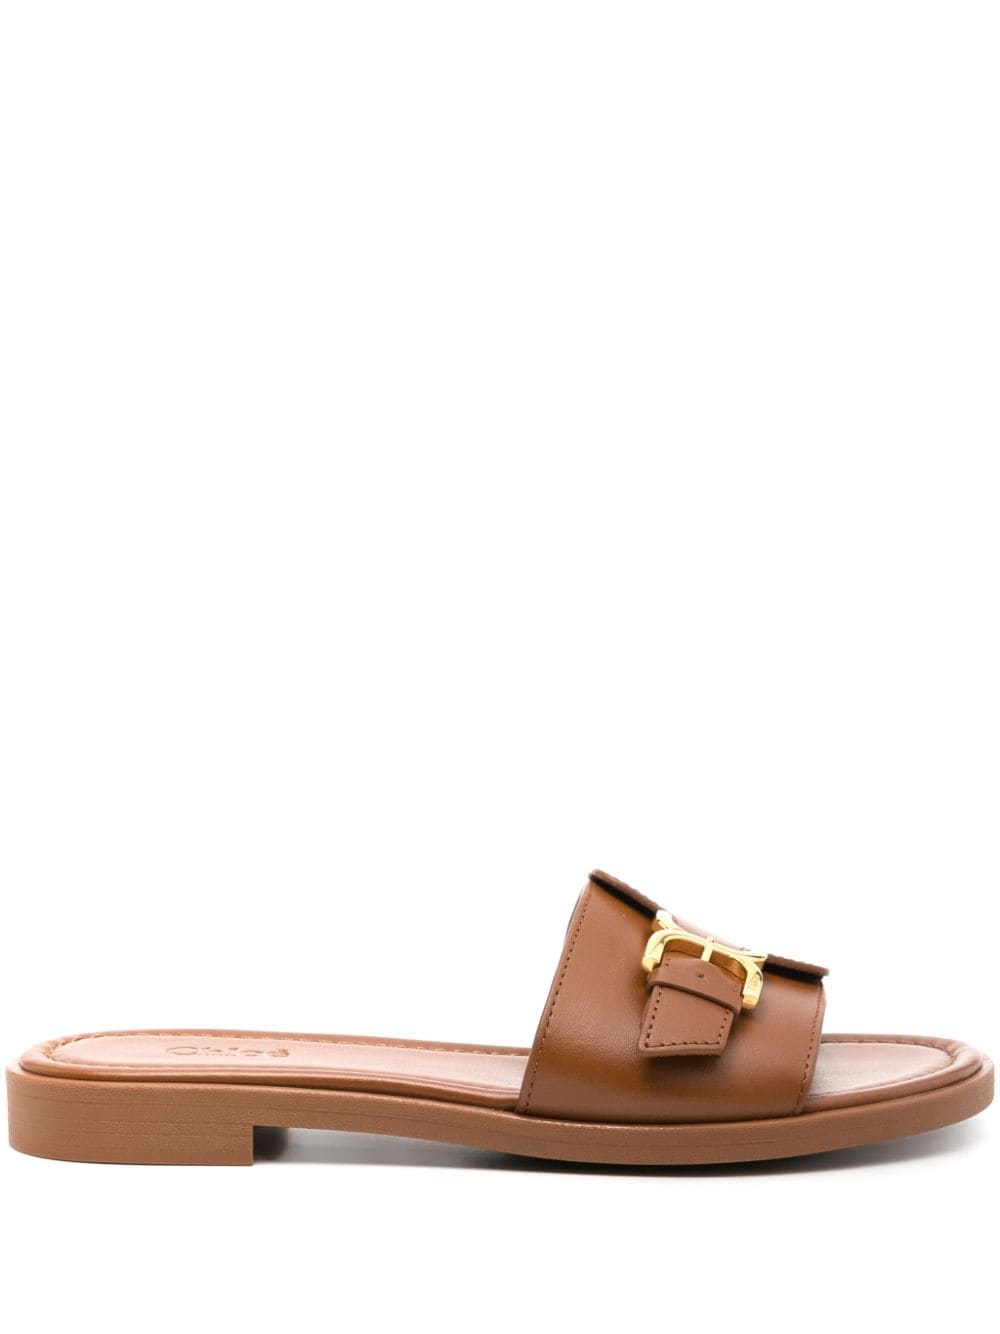 Chloé Caramel Leather Women's Sandals In Brown